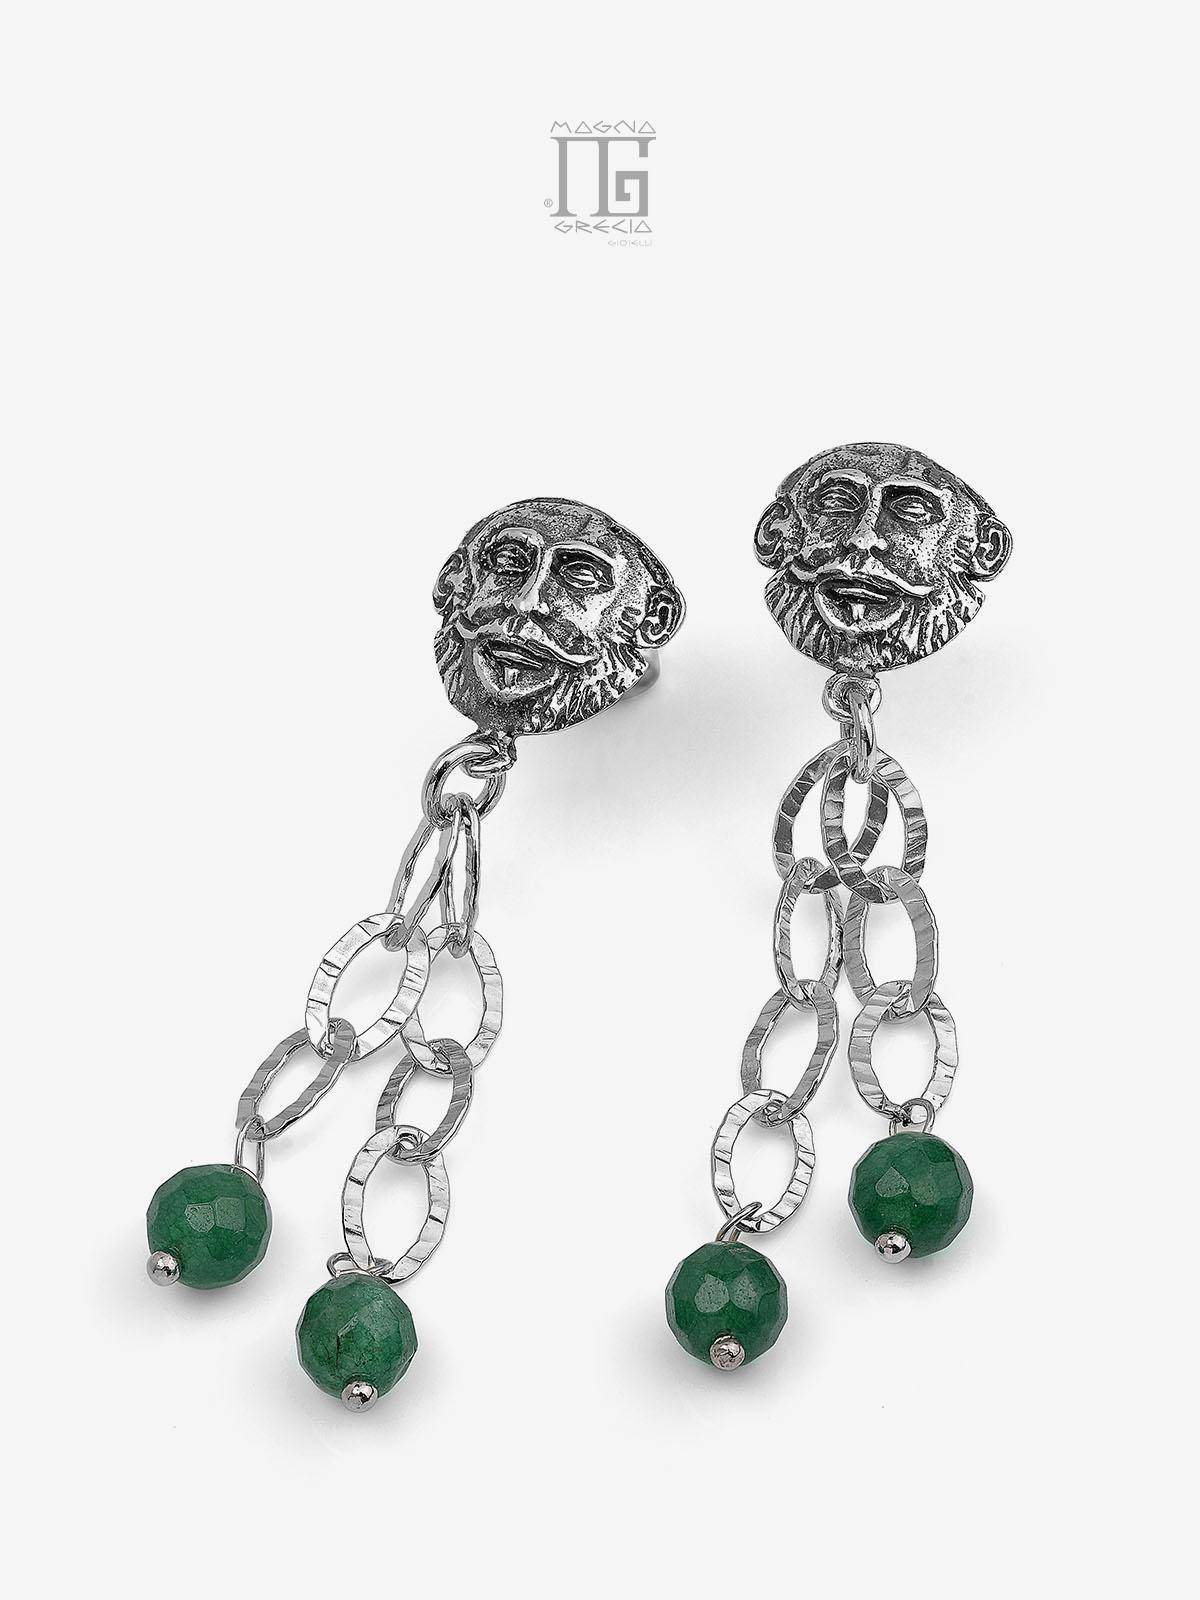 Silver earrings depicting the Face of Agamemnon and natural Green Agate stones Cod. MGK 3755 V